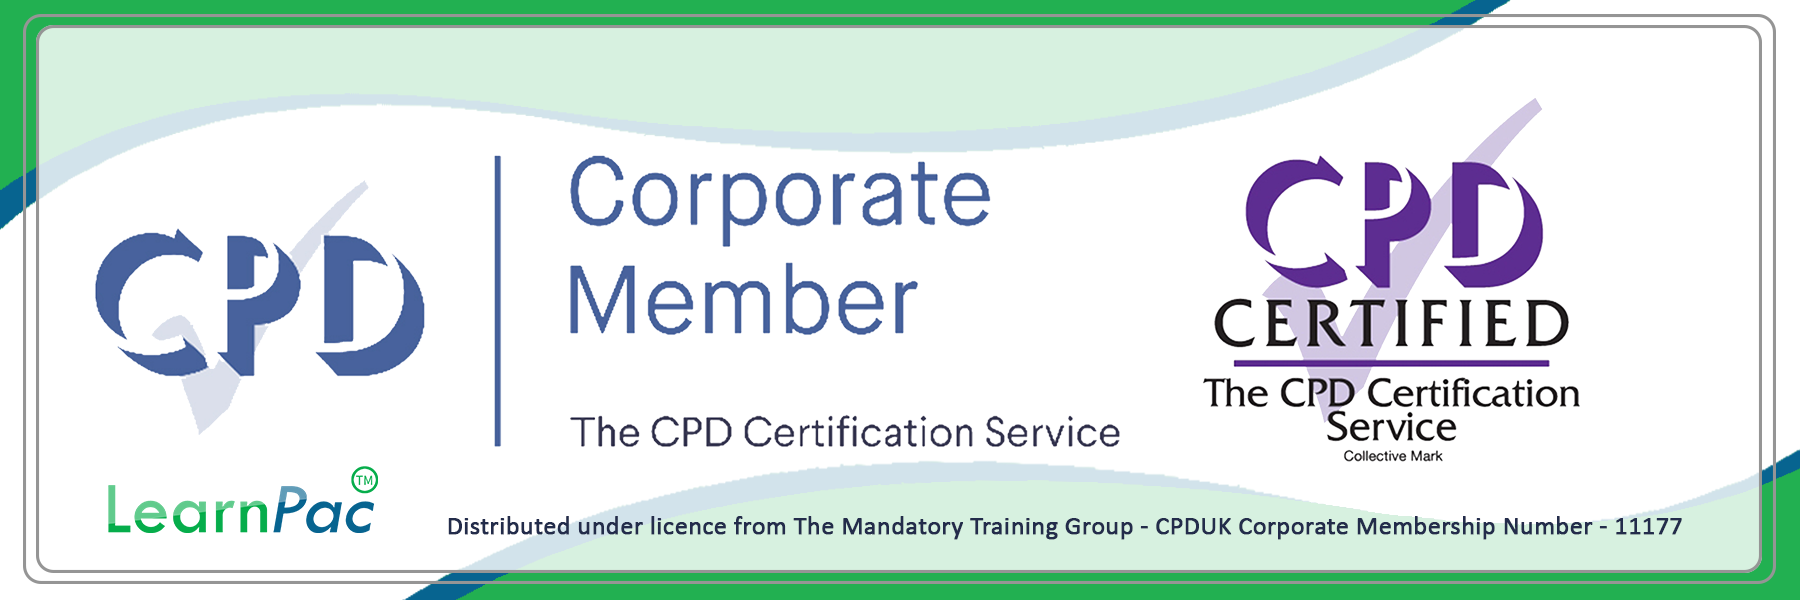 Disability Awareness - E-Learning Courses with Certificates - CPD Certified - LearnPac Systems UK -